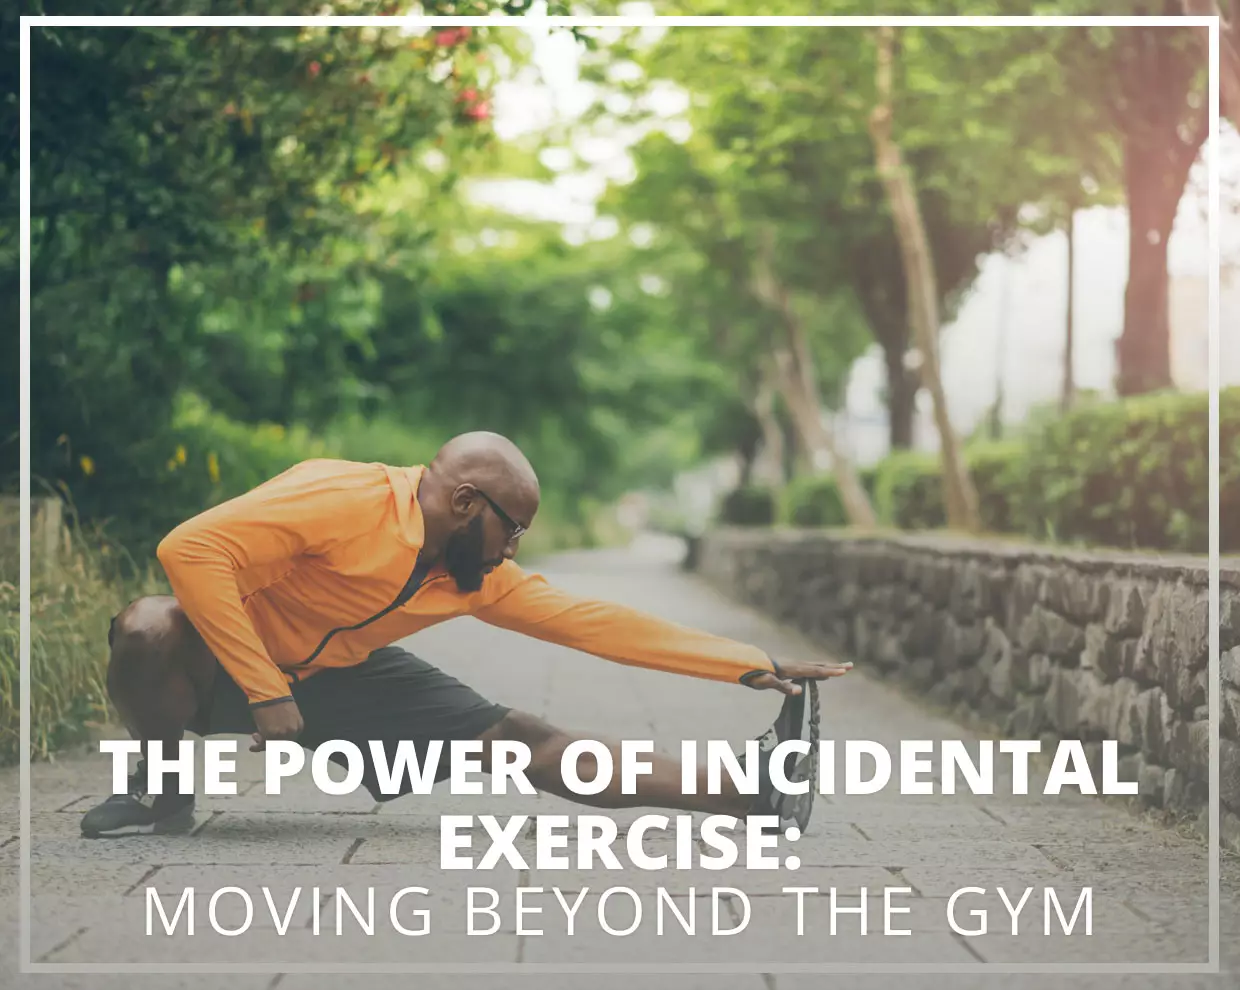 The Power of Incidental Exercise: Moving Beyond the Gym